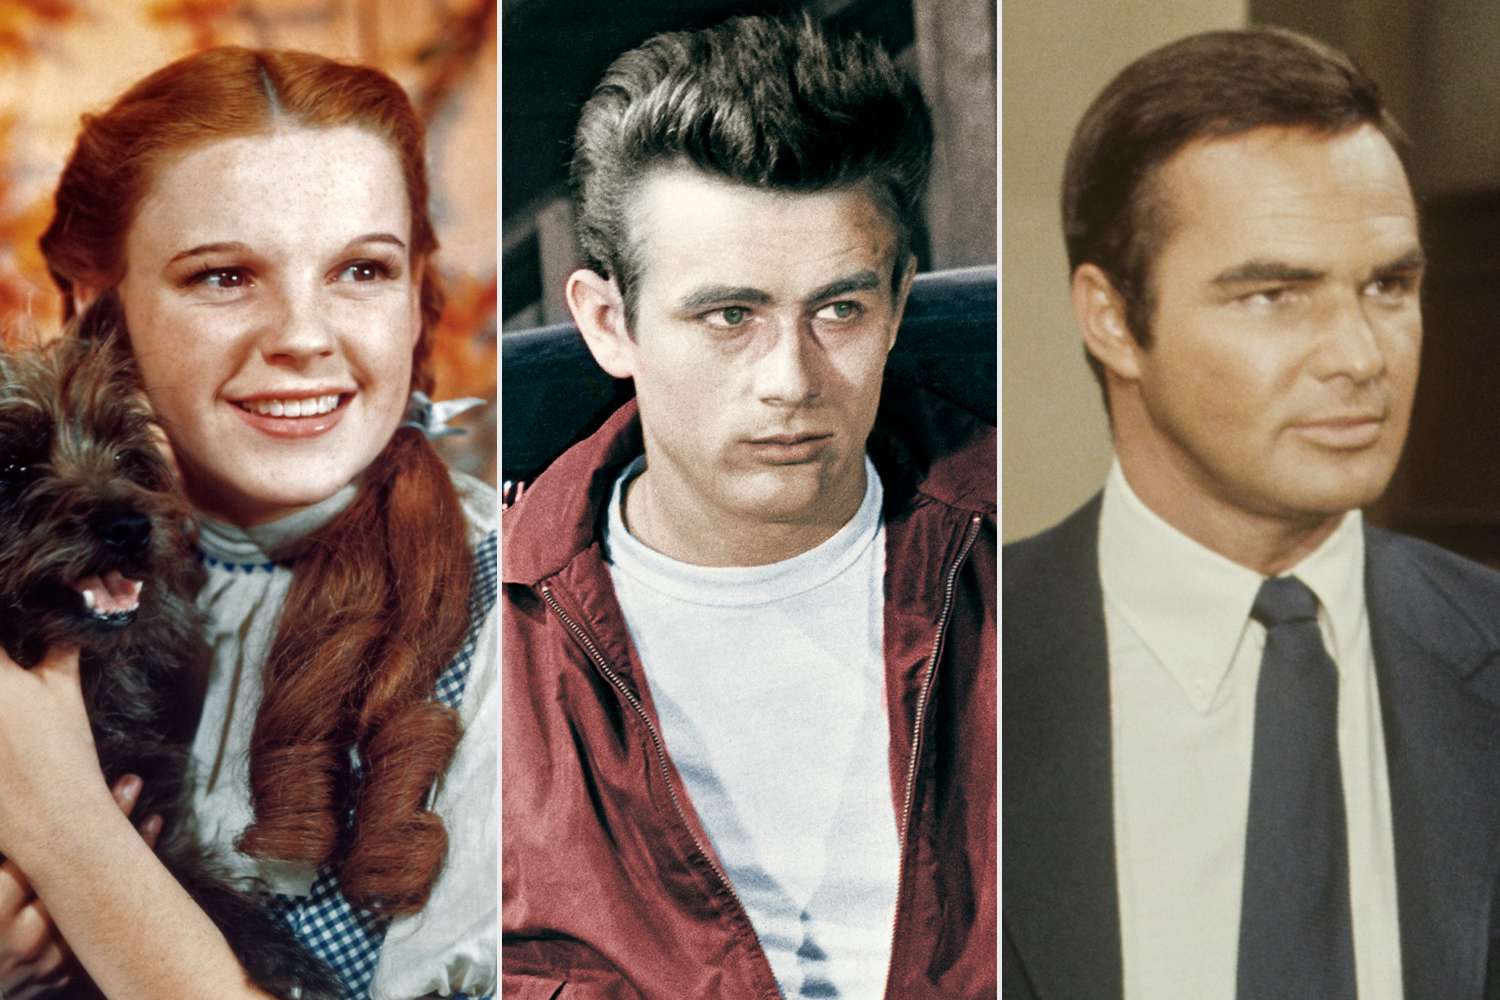 Voices of late actors Judy Garland, James Dean, Burt Reynolds, and more used in AI text-to-speech app